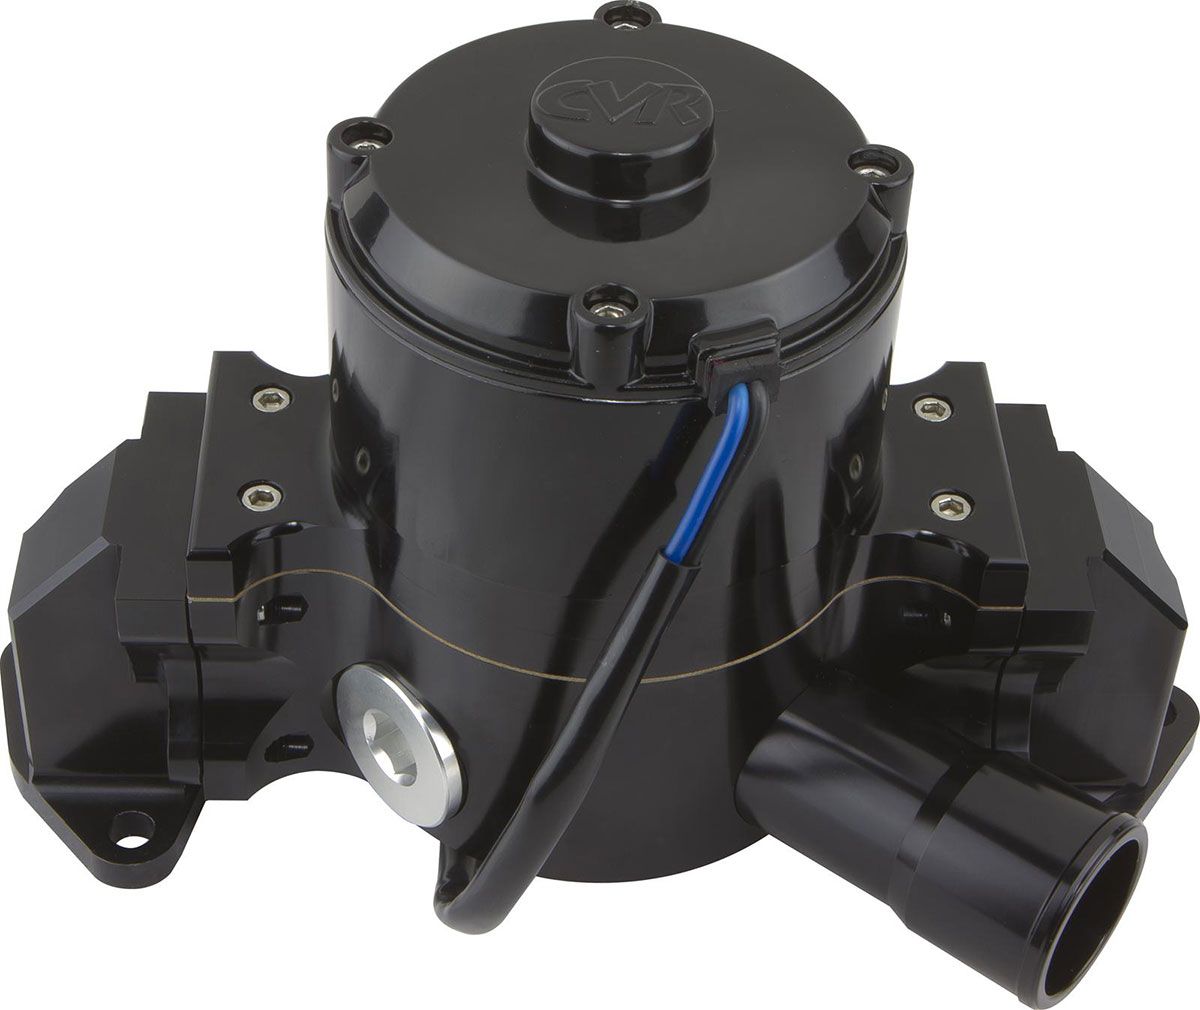 CVR8502BK - Proflo Extreme 55 GPM Electric Water Pump Suit SBF 289/302/351, Black Anodised